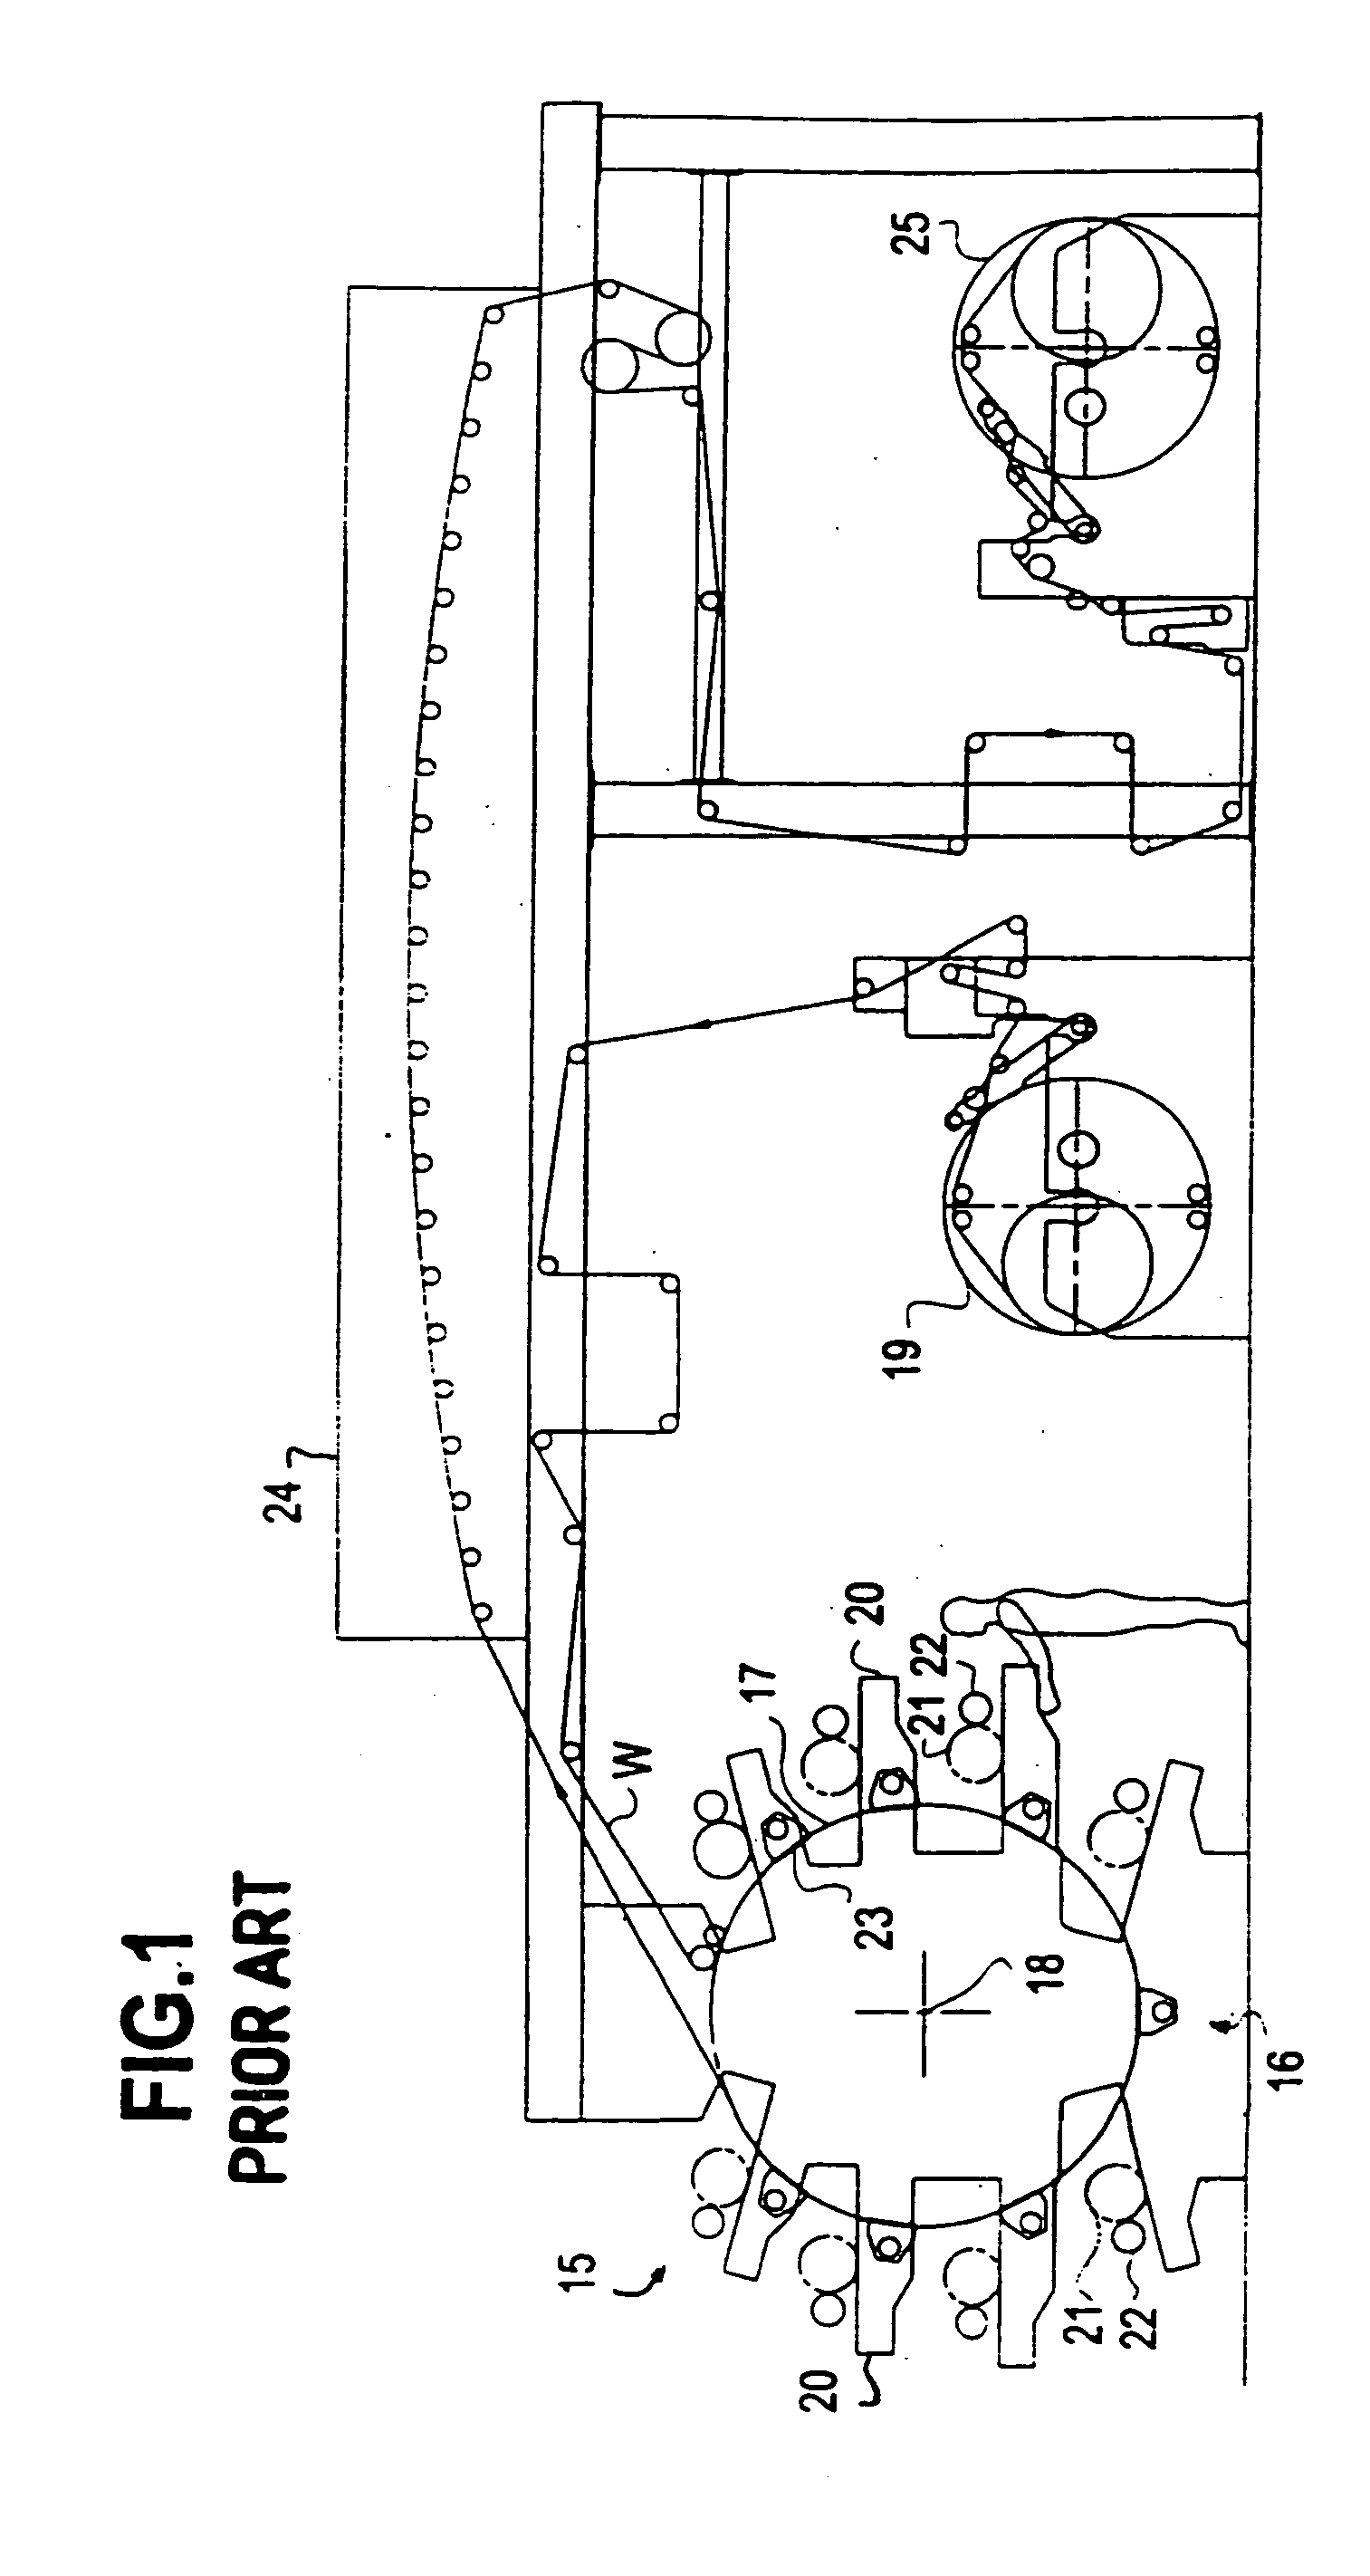 Method for lateral adjustment of a directly driven load without shifting the entire drive assembly